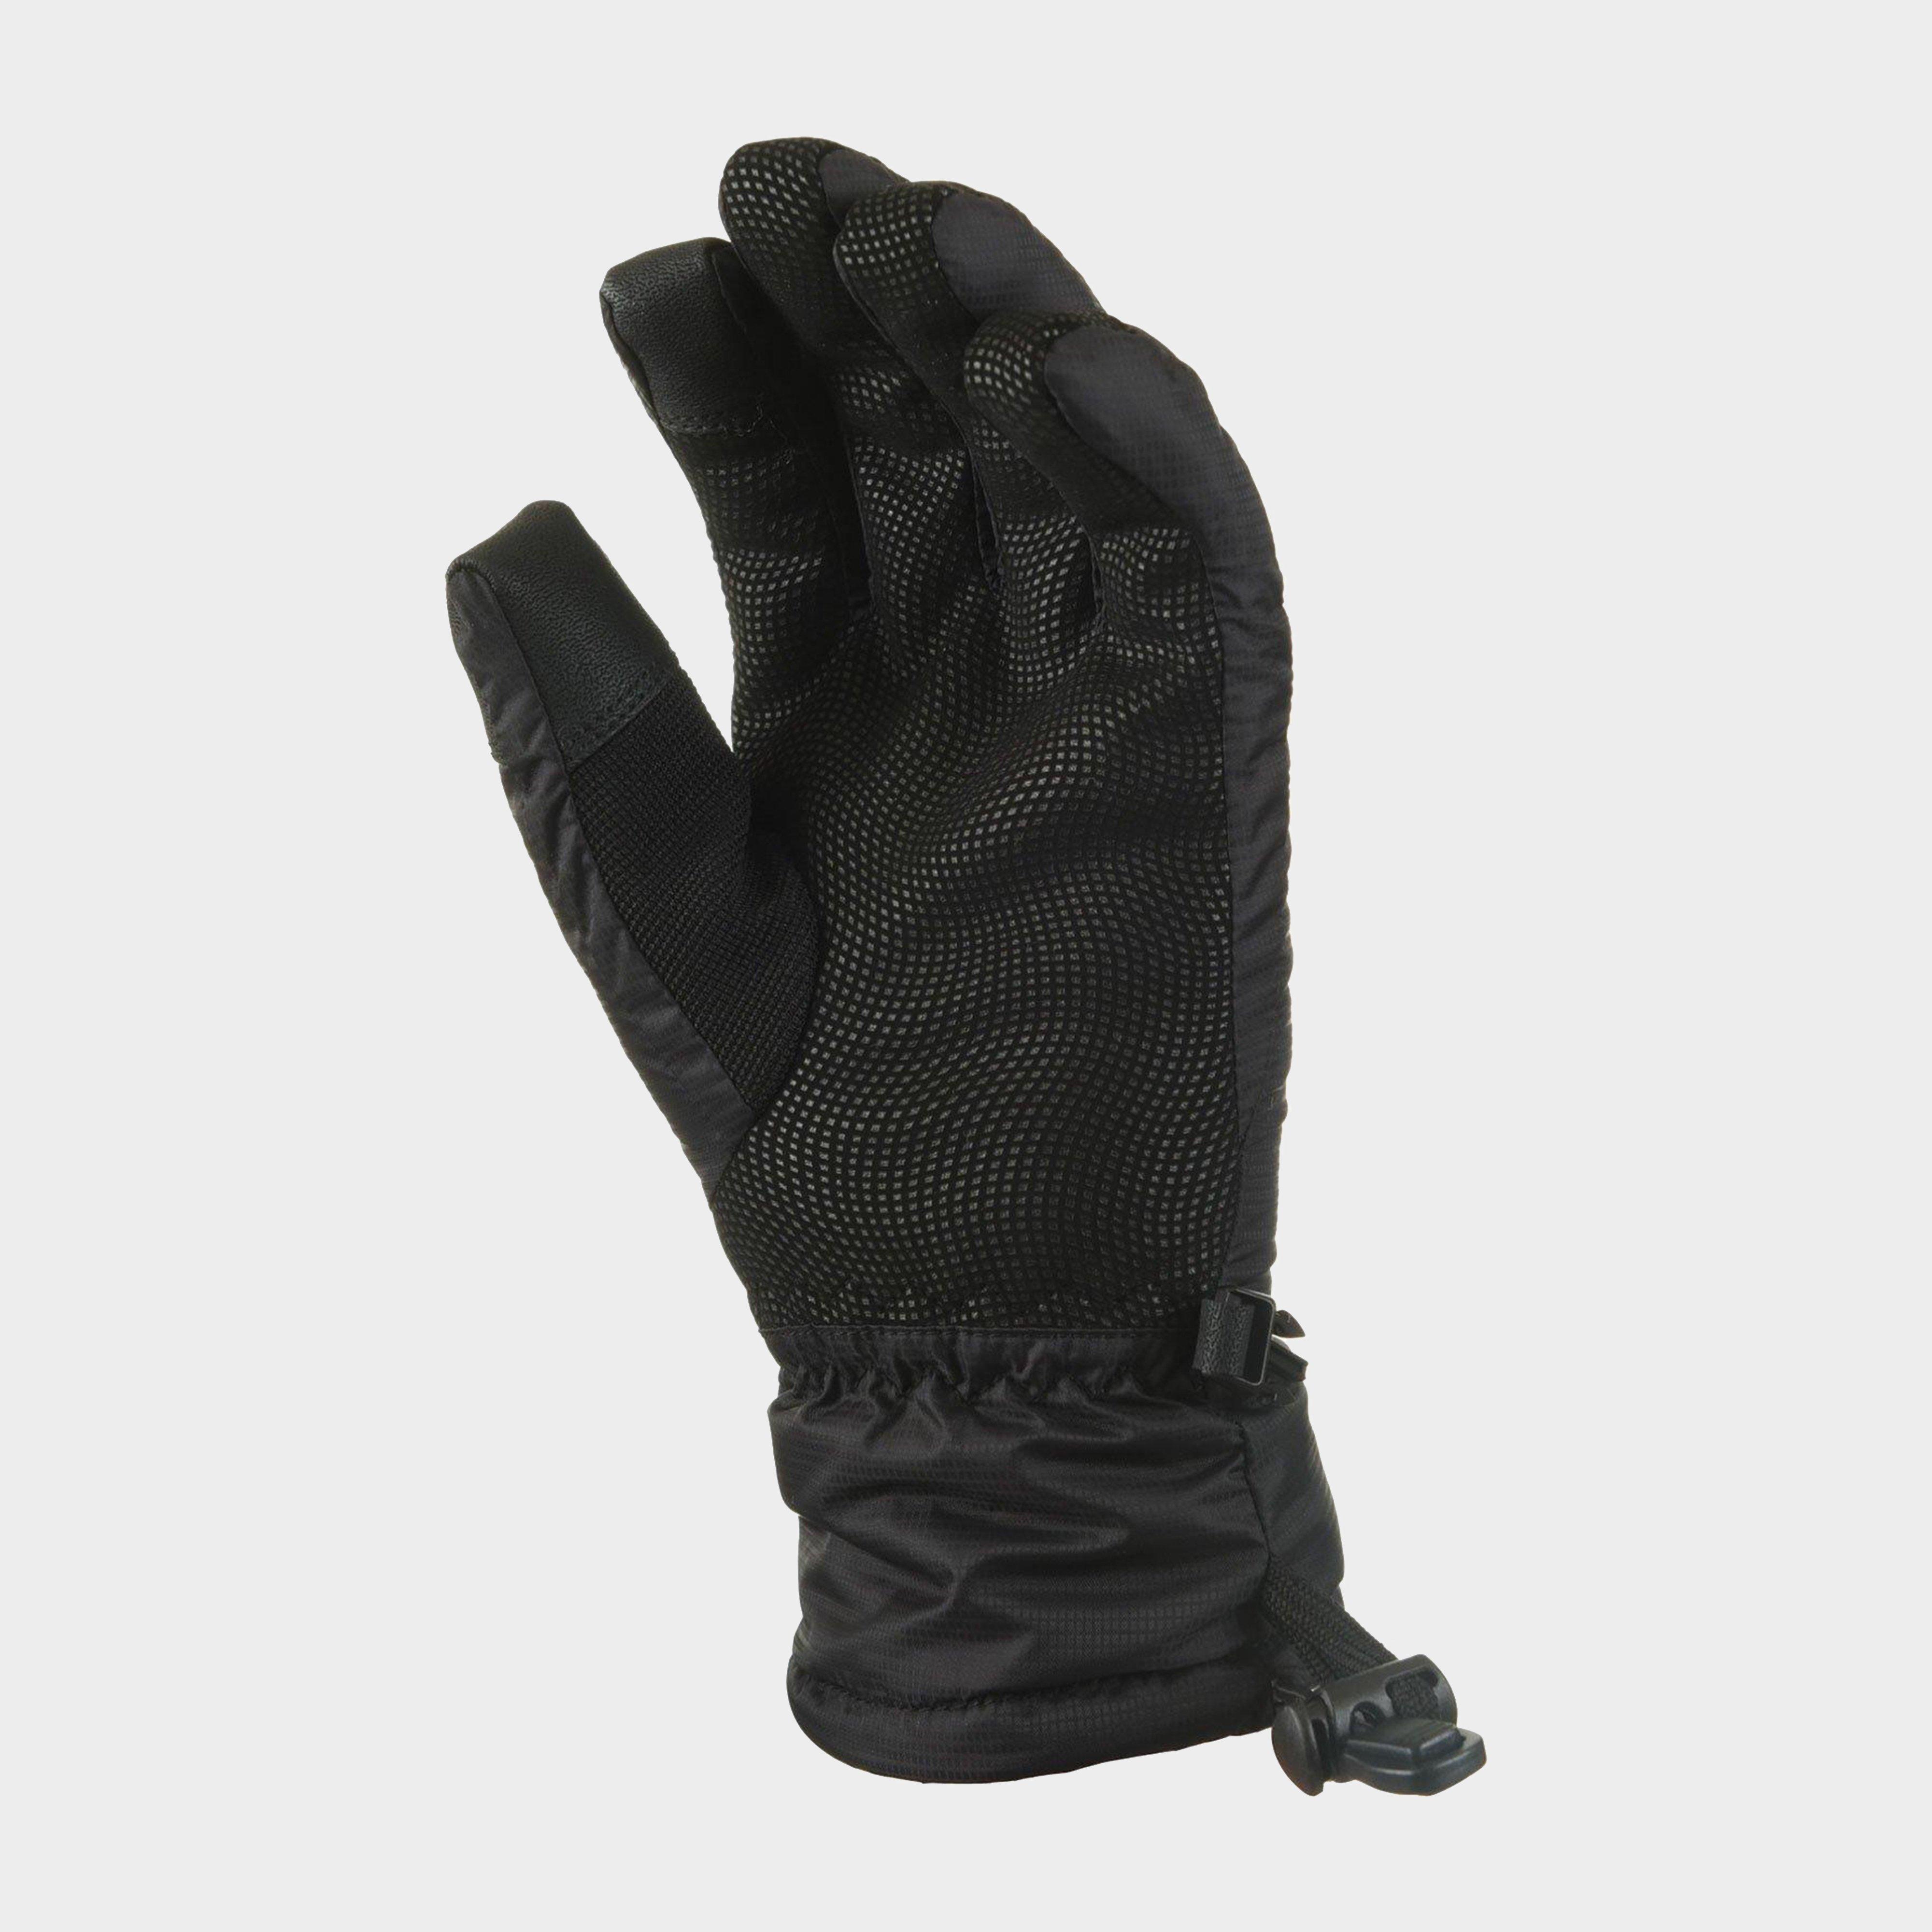 Trekmates ClassicDRY Jnr Kids' Gloves Review